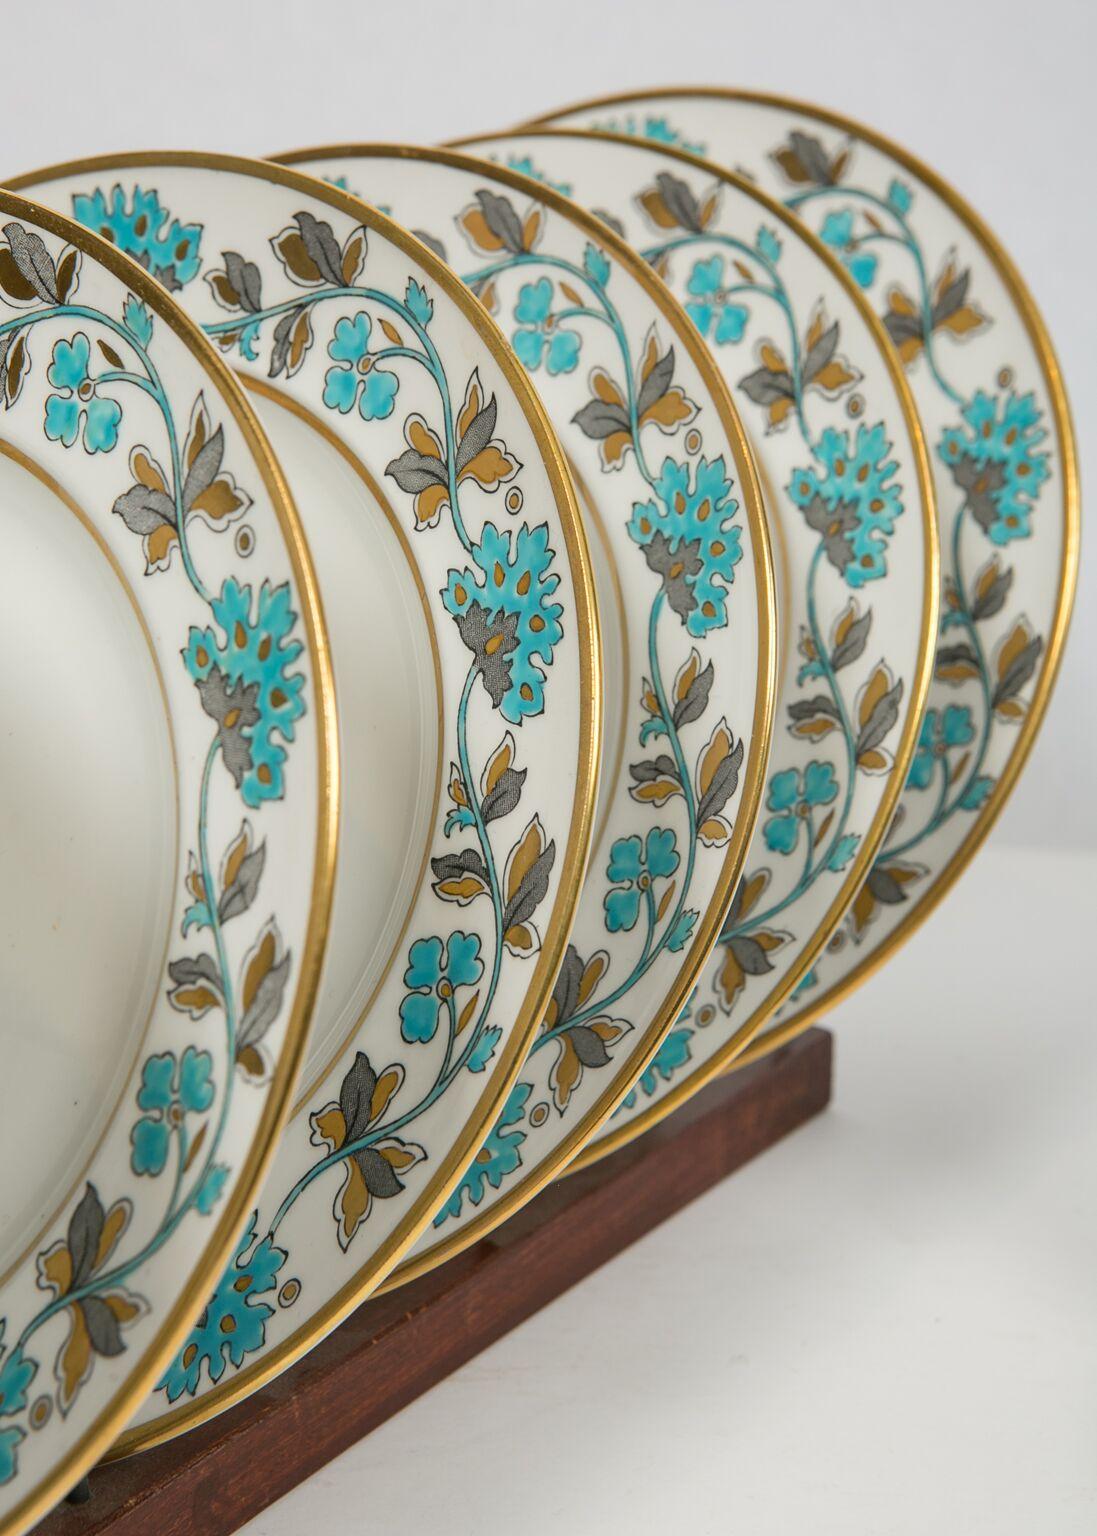 Other English Bone China Dessert Dishes a Set of Eight Turquoise Made Mid-20th Century